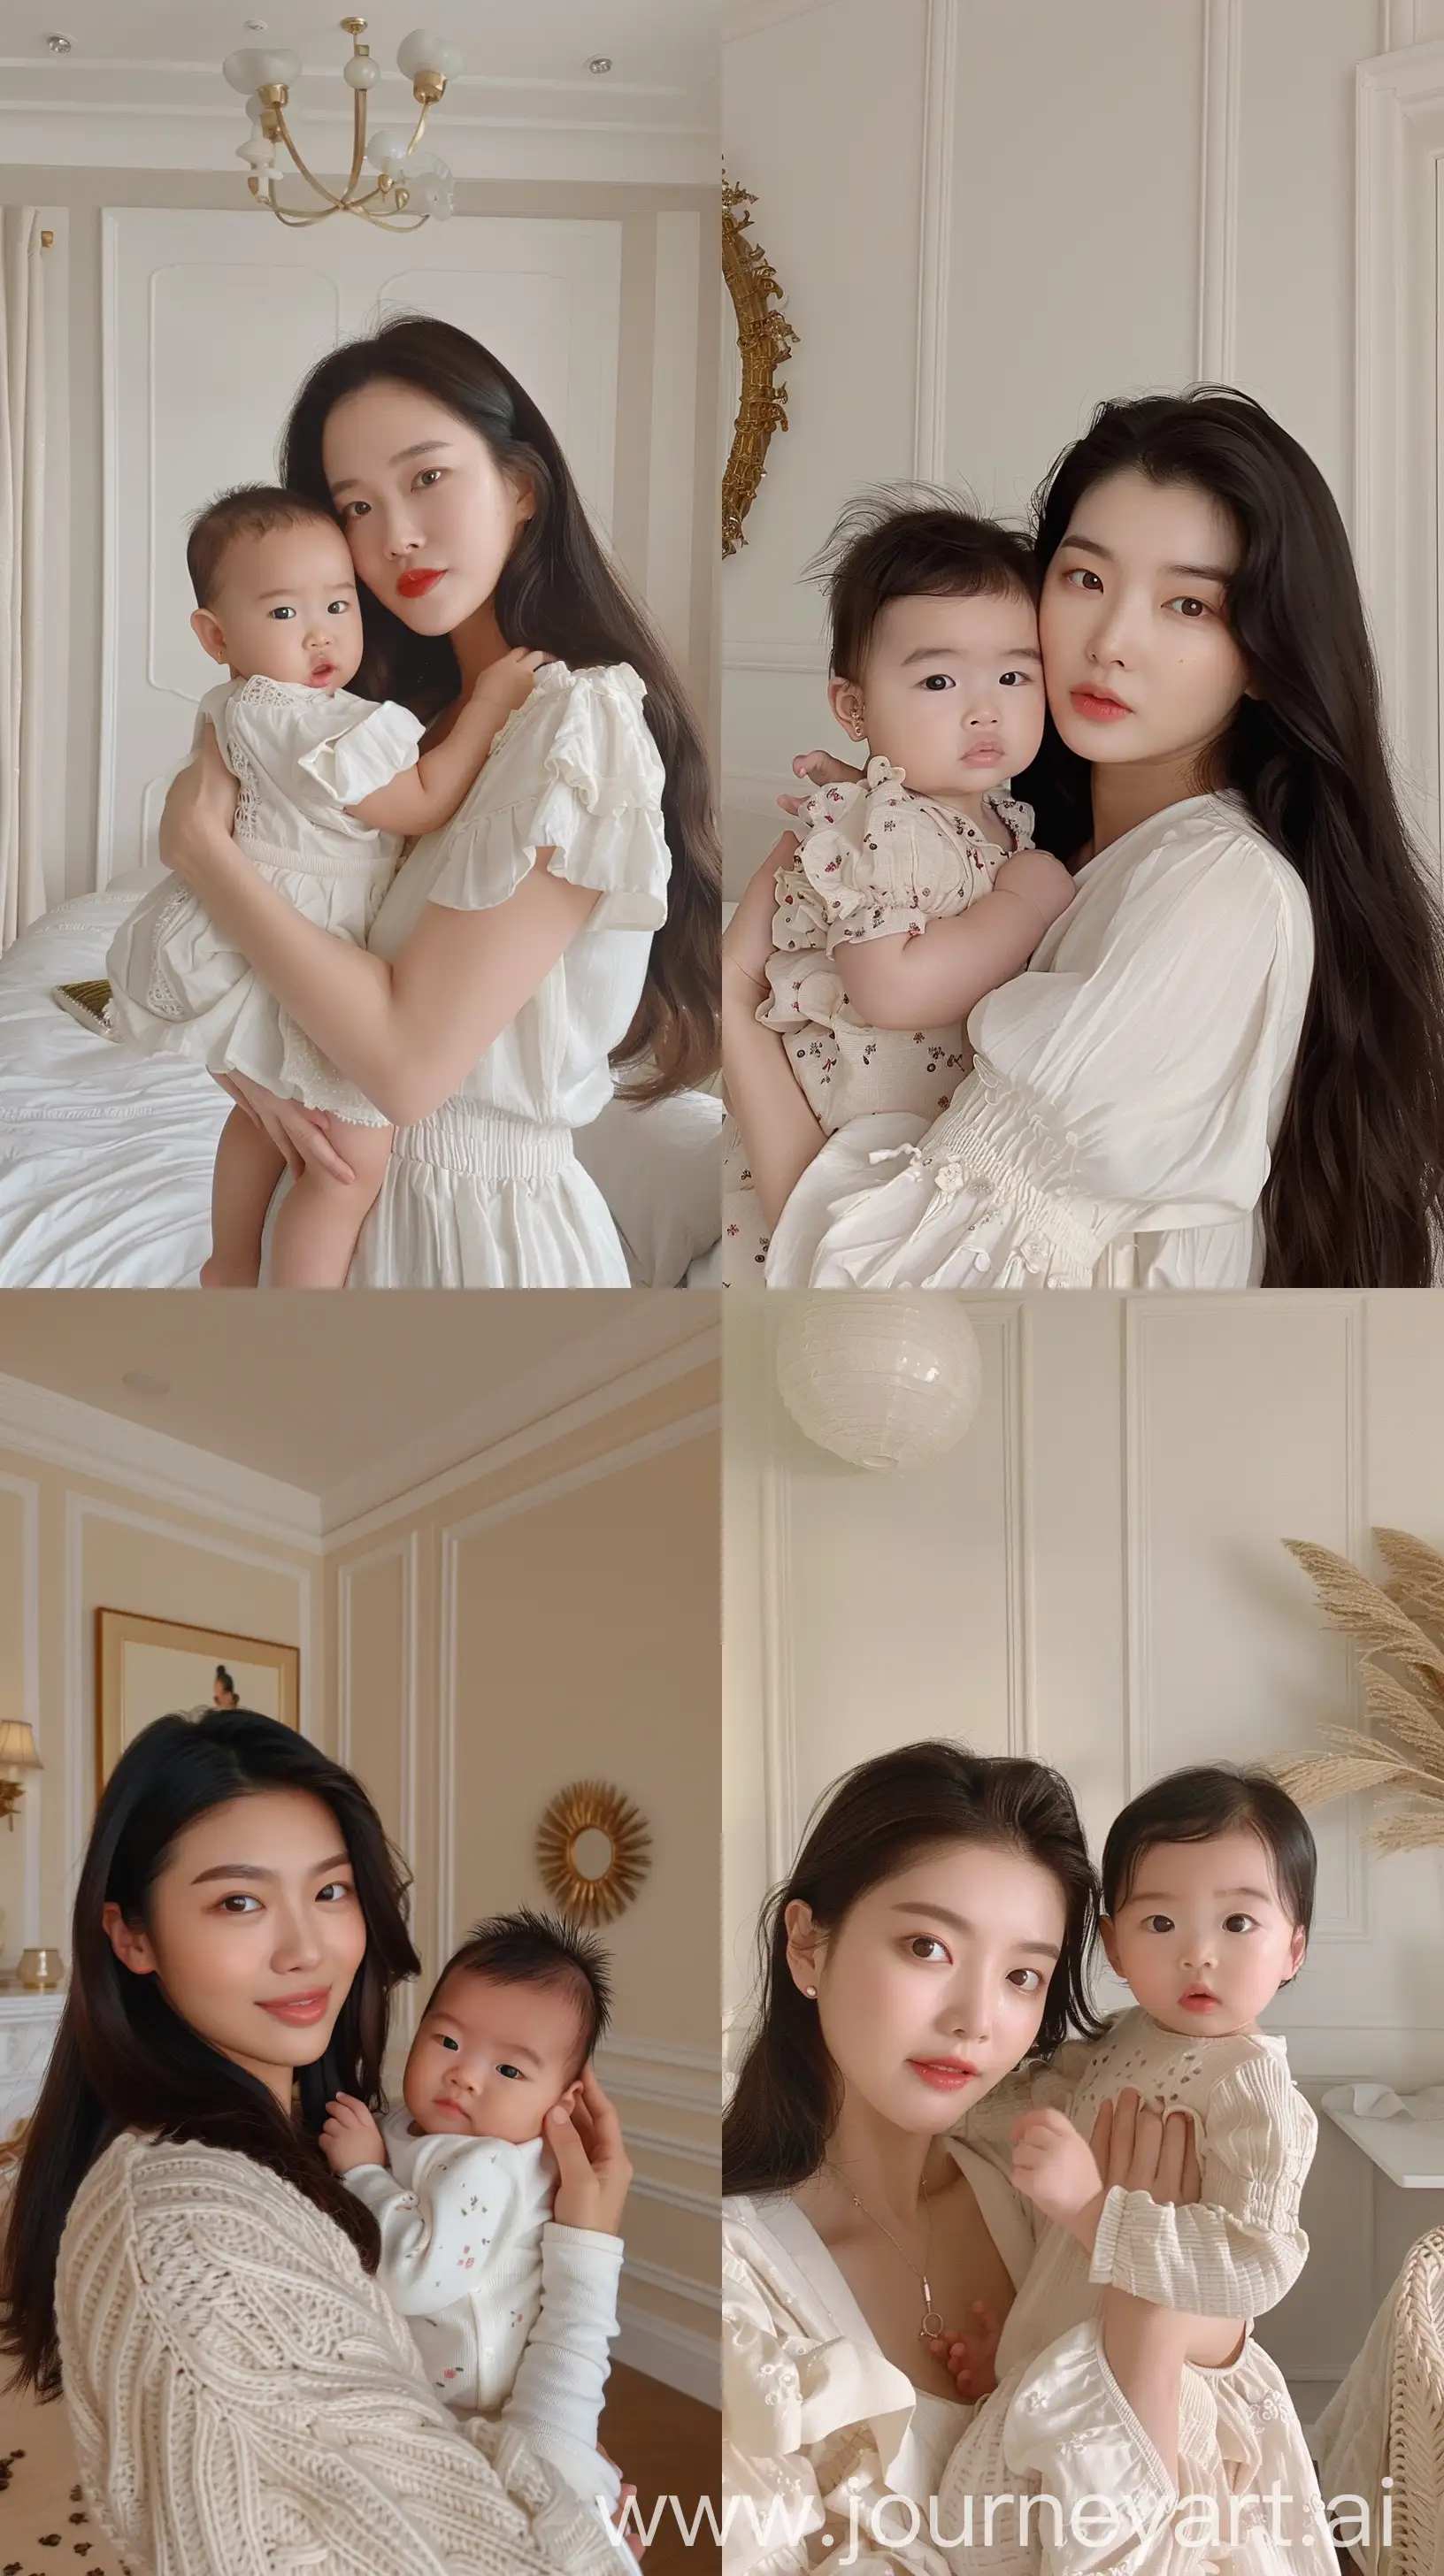 jennie kim holding 2 years old baby girl, facial feature look a like jennie kim, aestethic selfie,inside cream room --ar 9:16